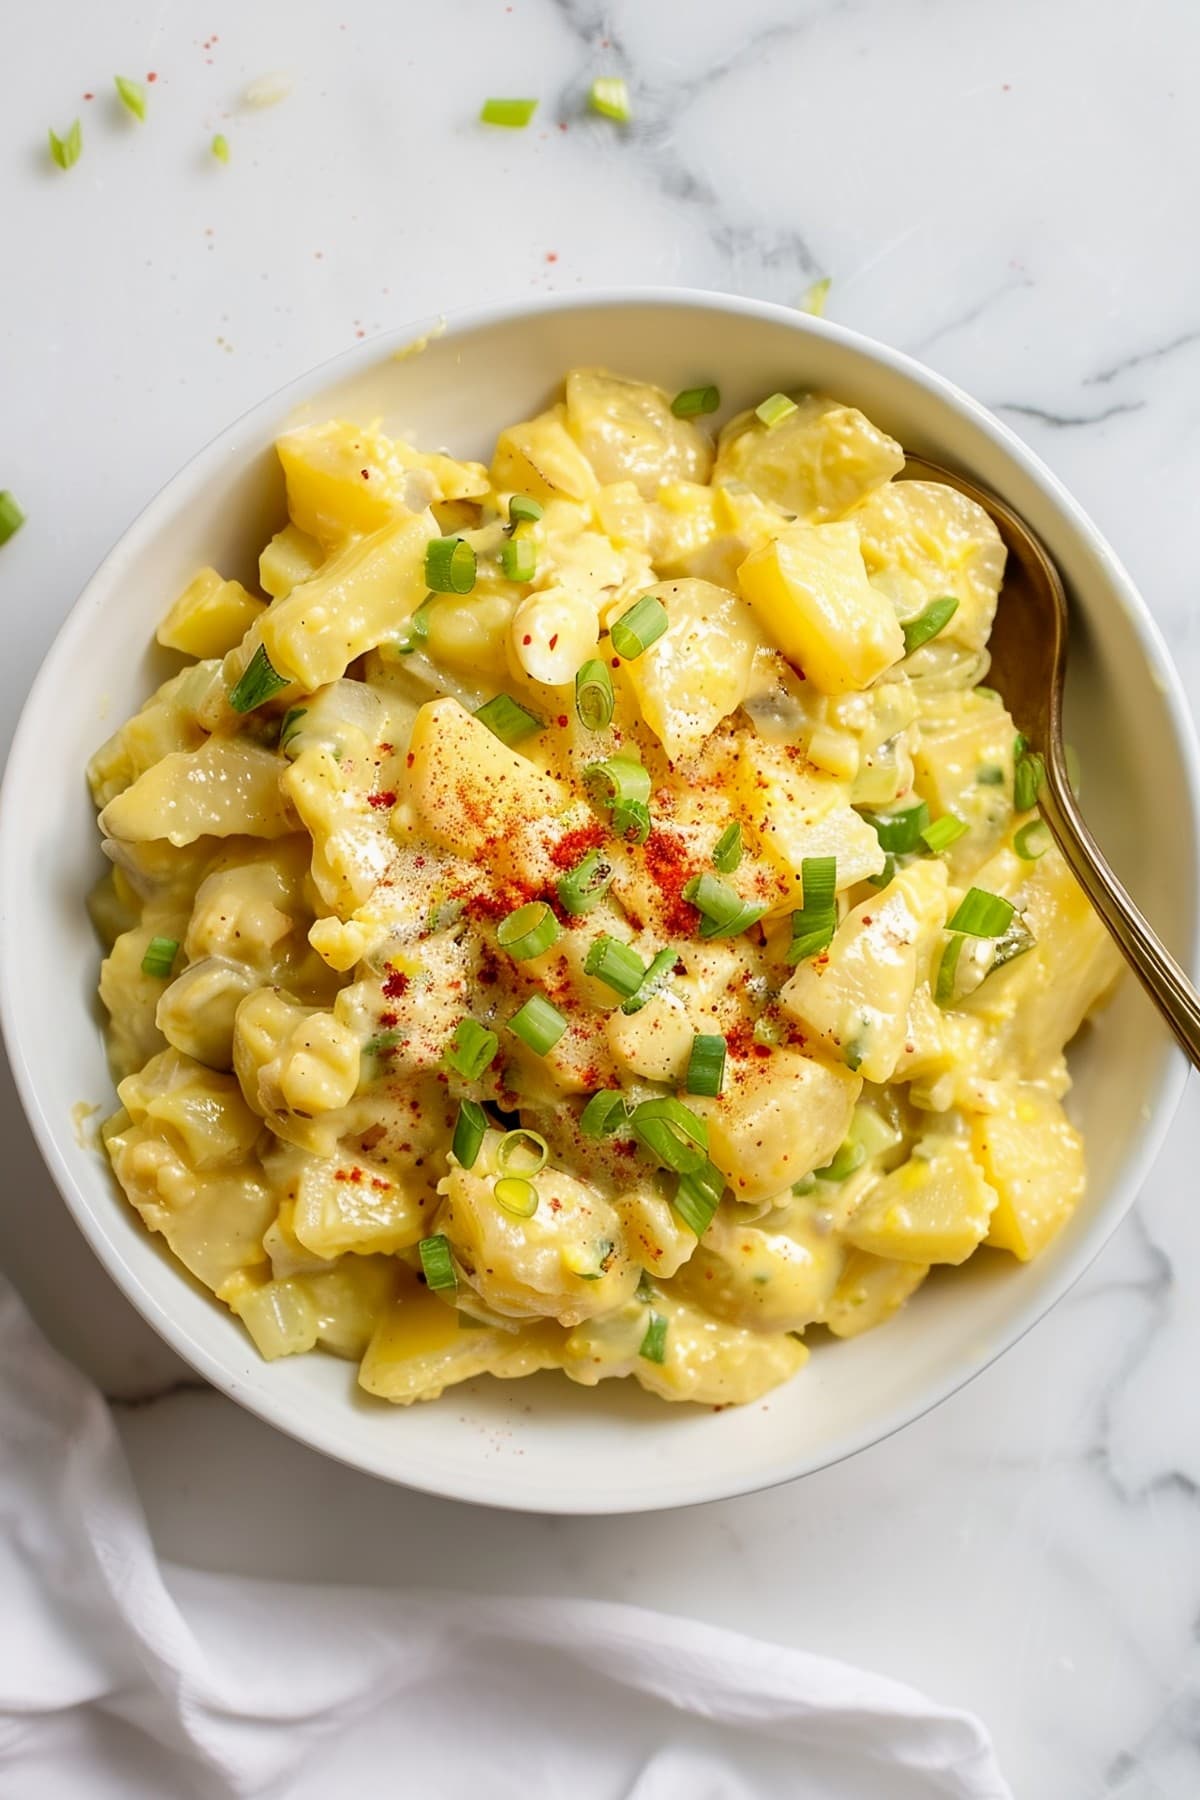 Classic Southern potato salad, featuring creamy potatoes, hard-boiled eggs, and tangy mustard dressing